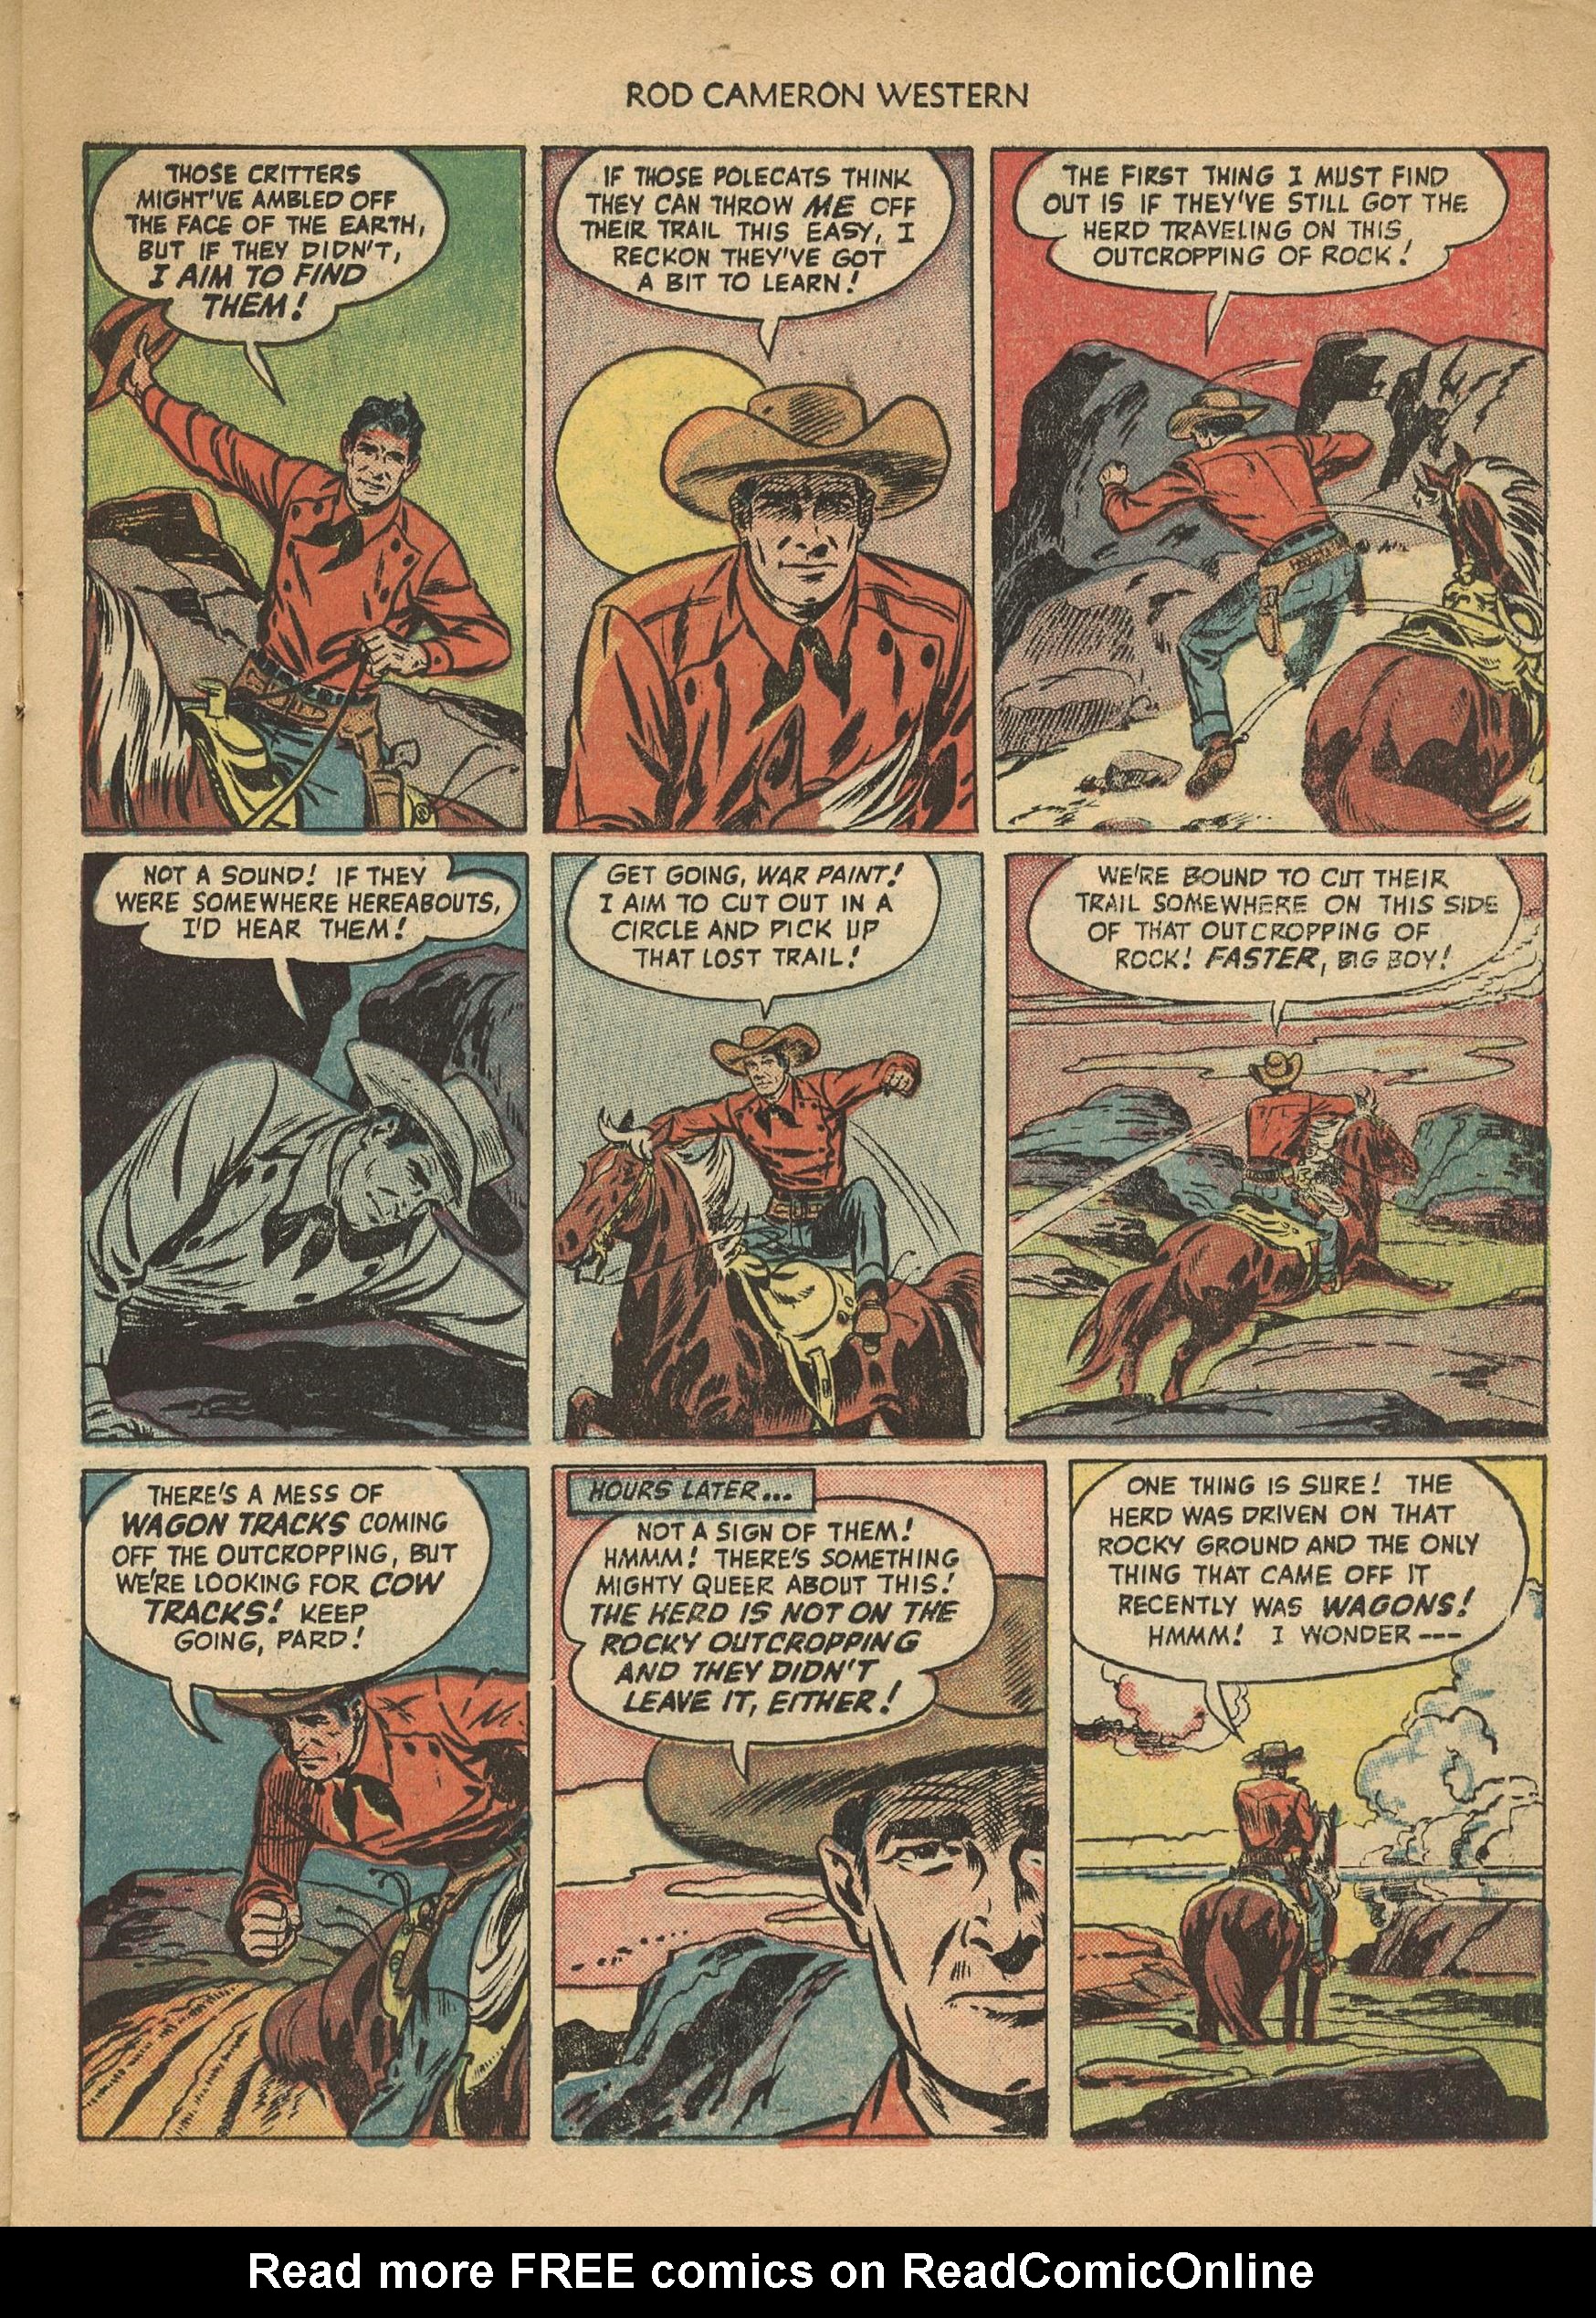 Read online Rod Cameron Western comic -  Issue #1 - 11